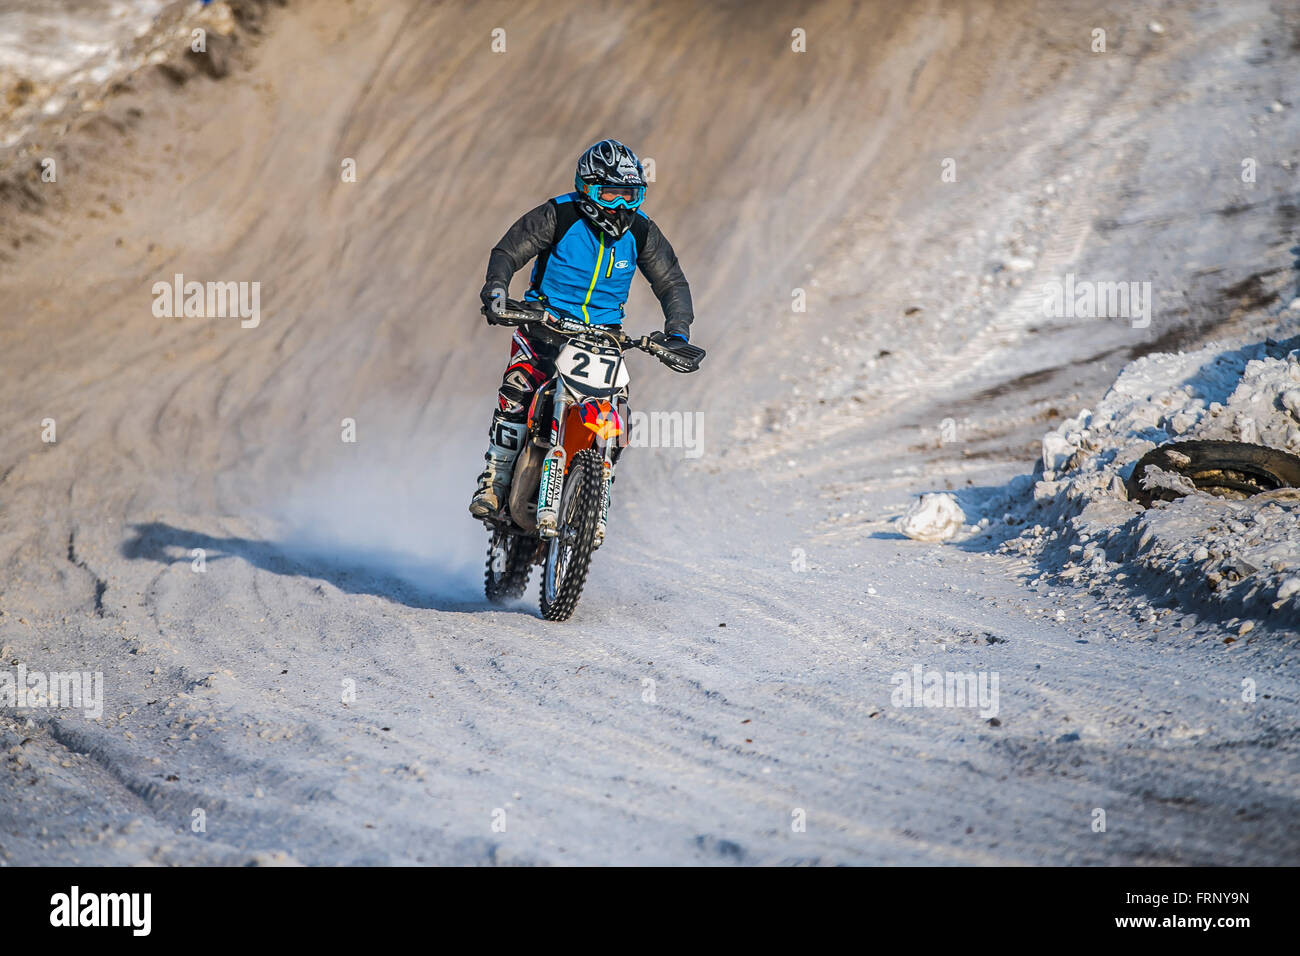 racer man on a motorcycle riding racing track during Cup Winter motocross Stock Photo